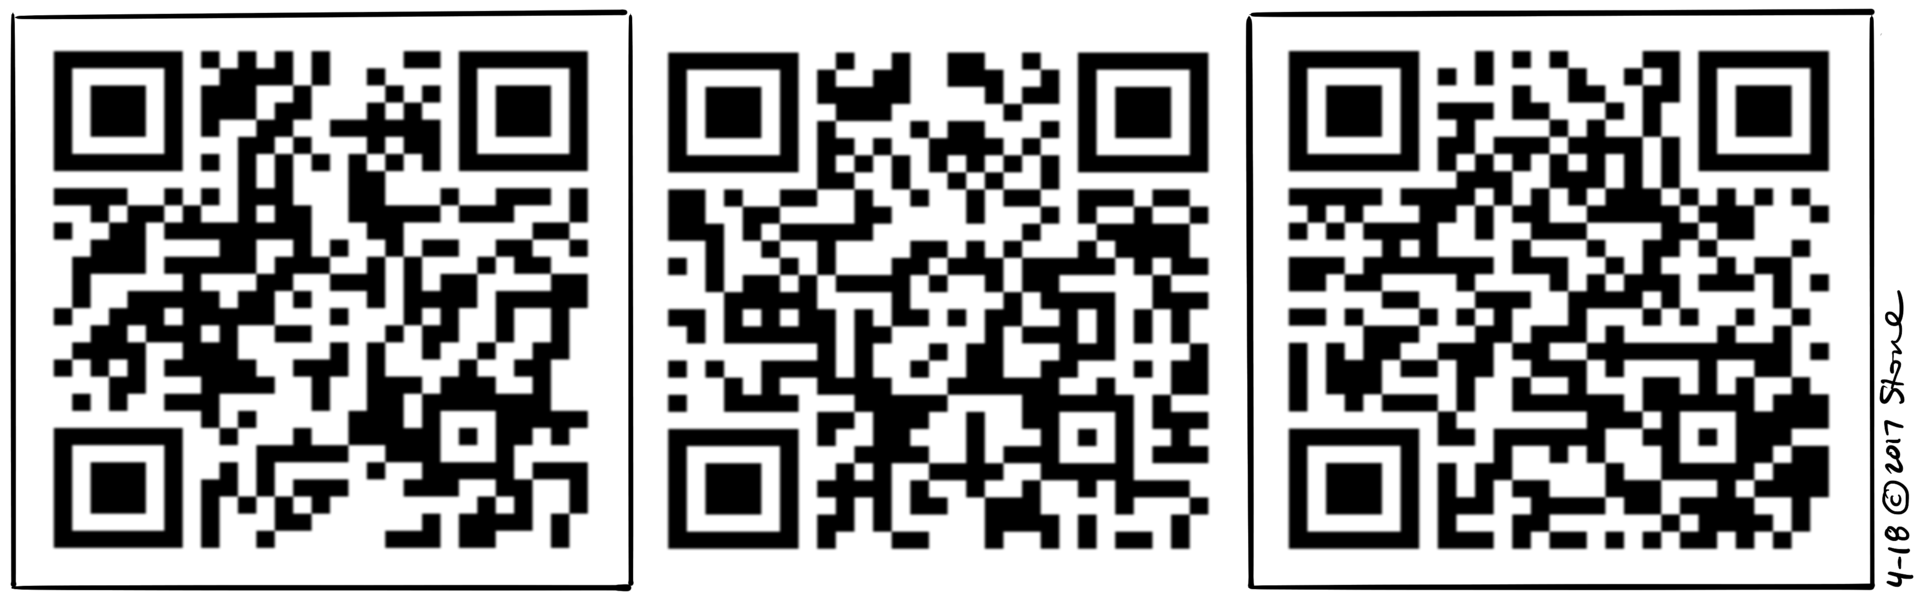 This comic is delivered using QR Codes. Use your mobile device to visit each panel's URL.